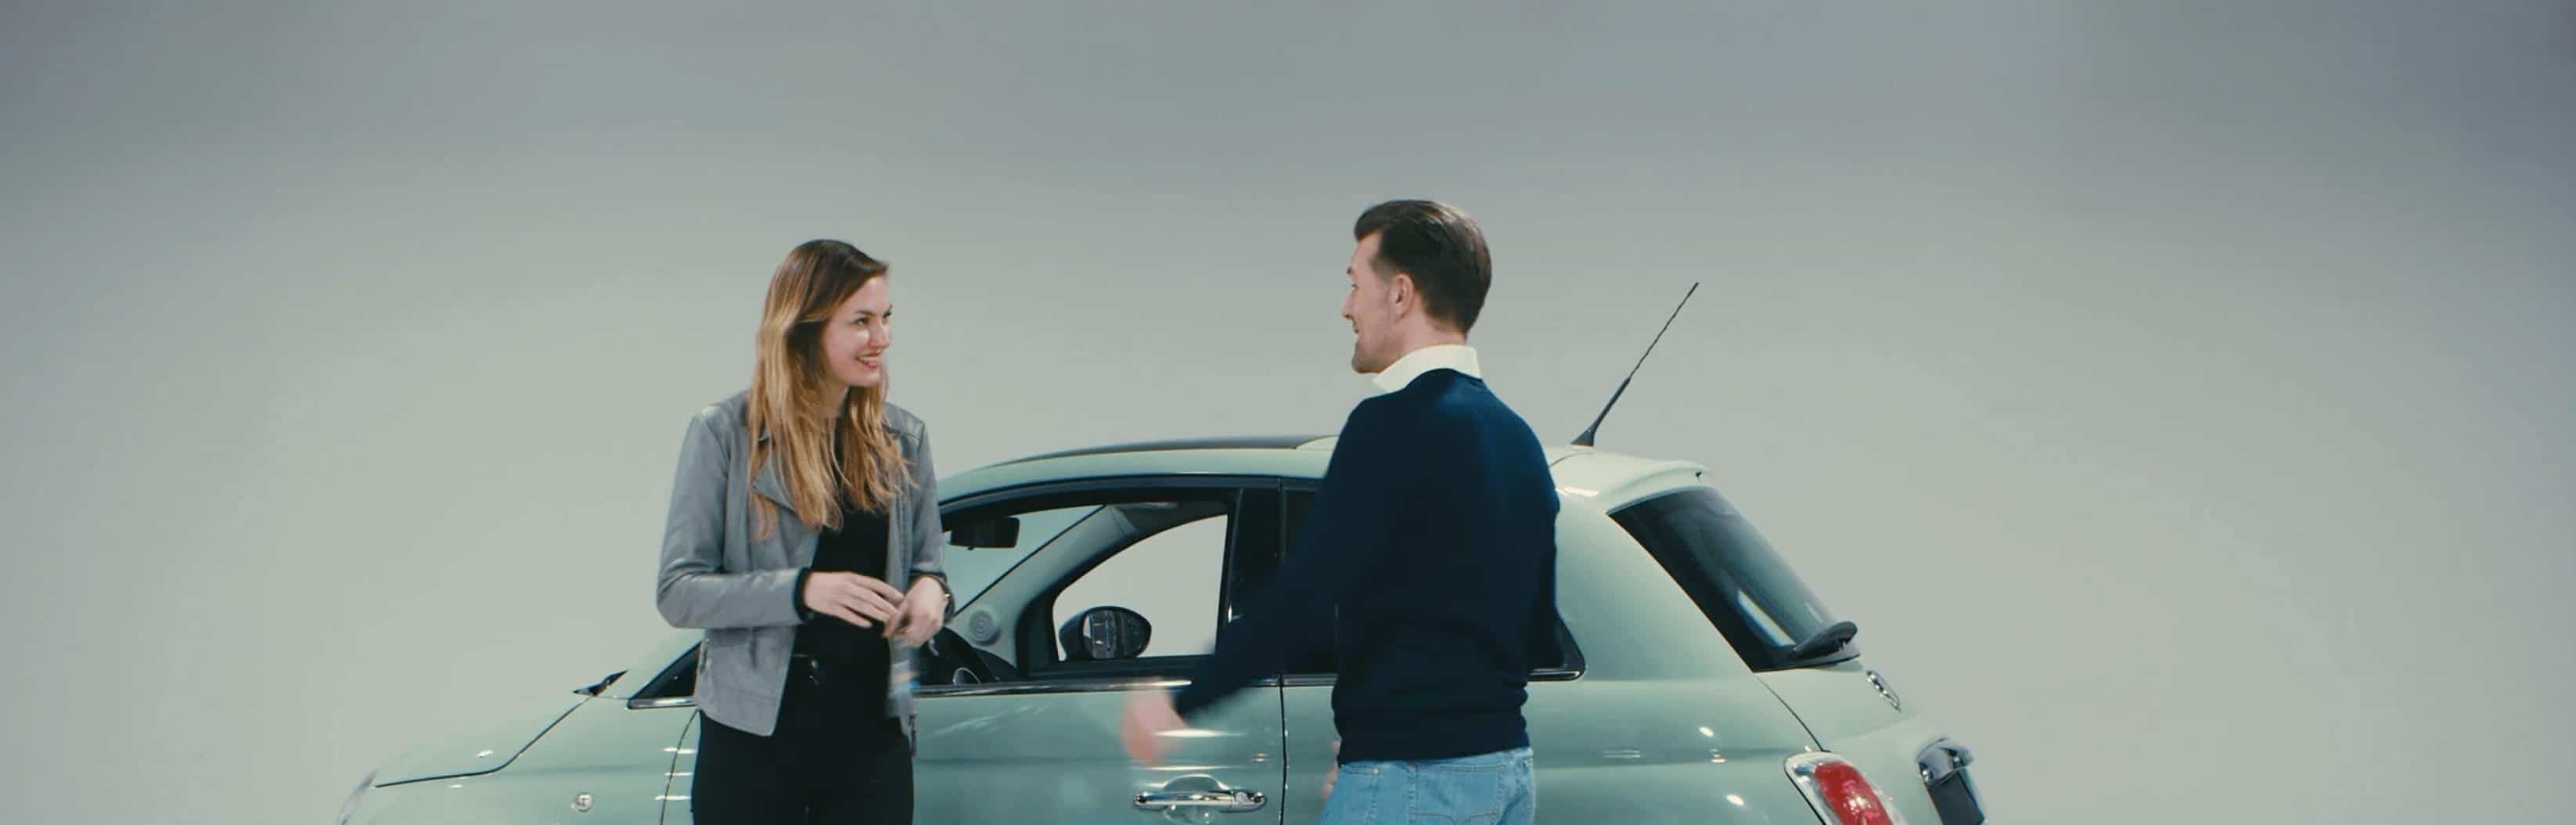 Two people exchanging keys for a car